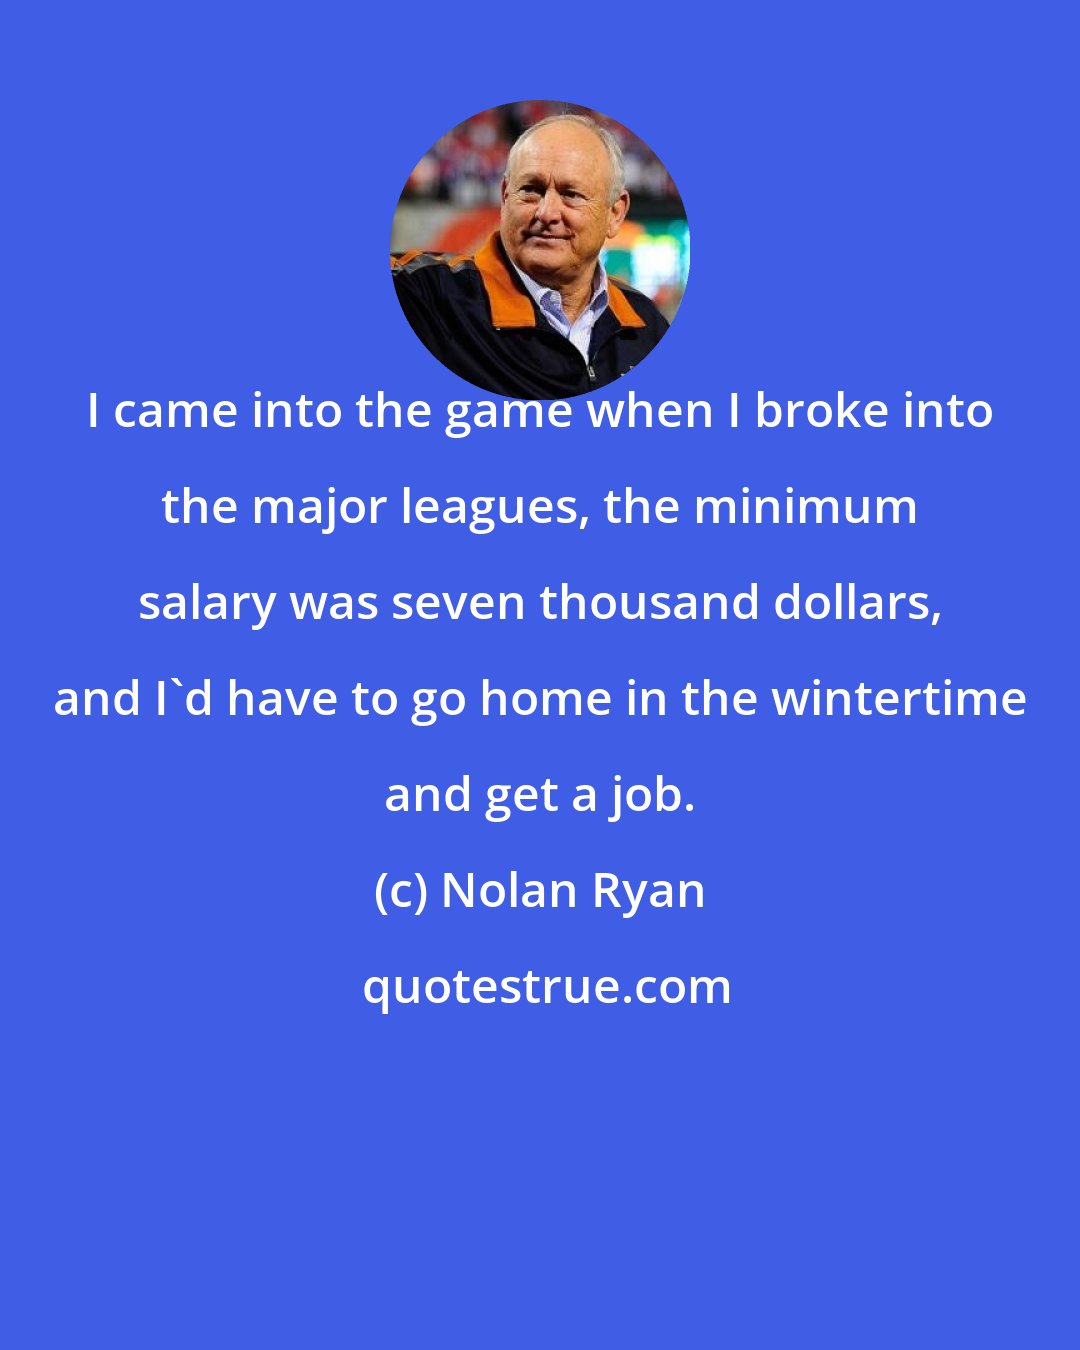 Nolan Ryan: I came into the game when I broke into the major leagues, the minimum salary was seven thousand dollars, and I'd have to go home in the wintertime and get a job.